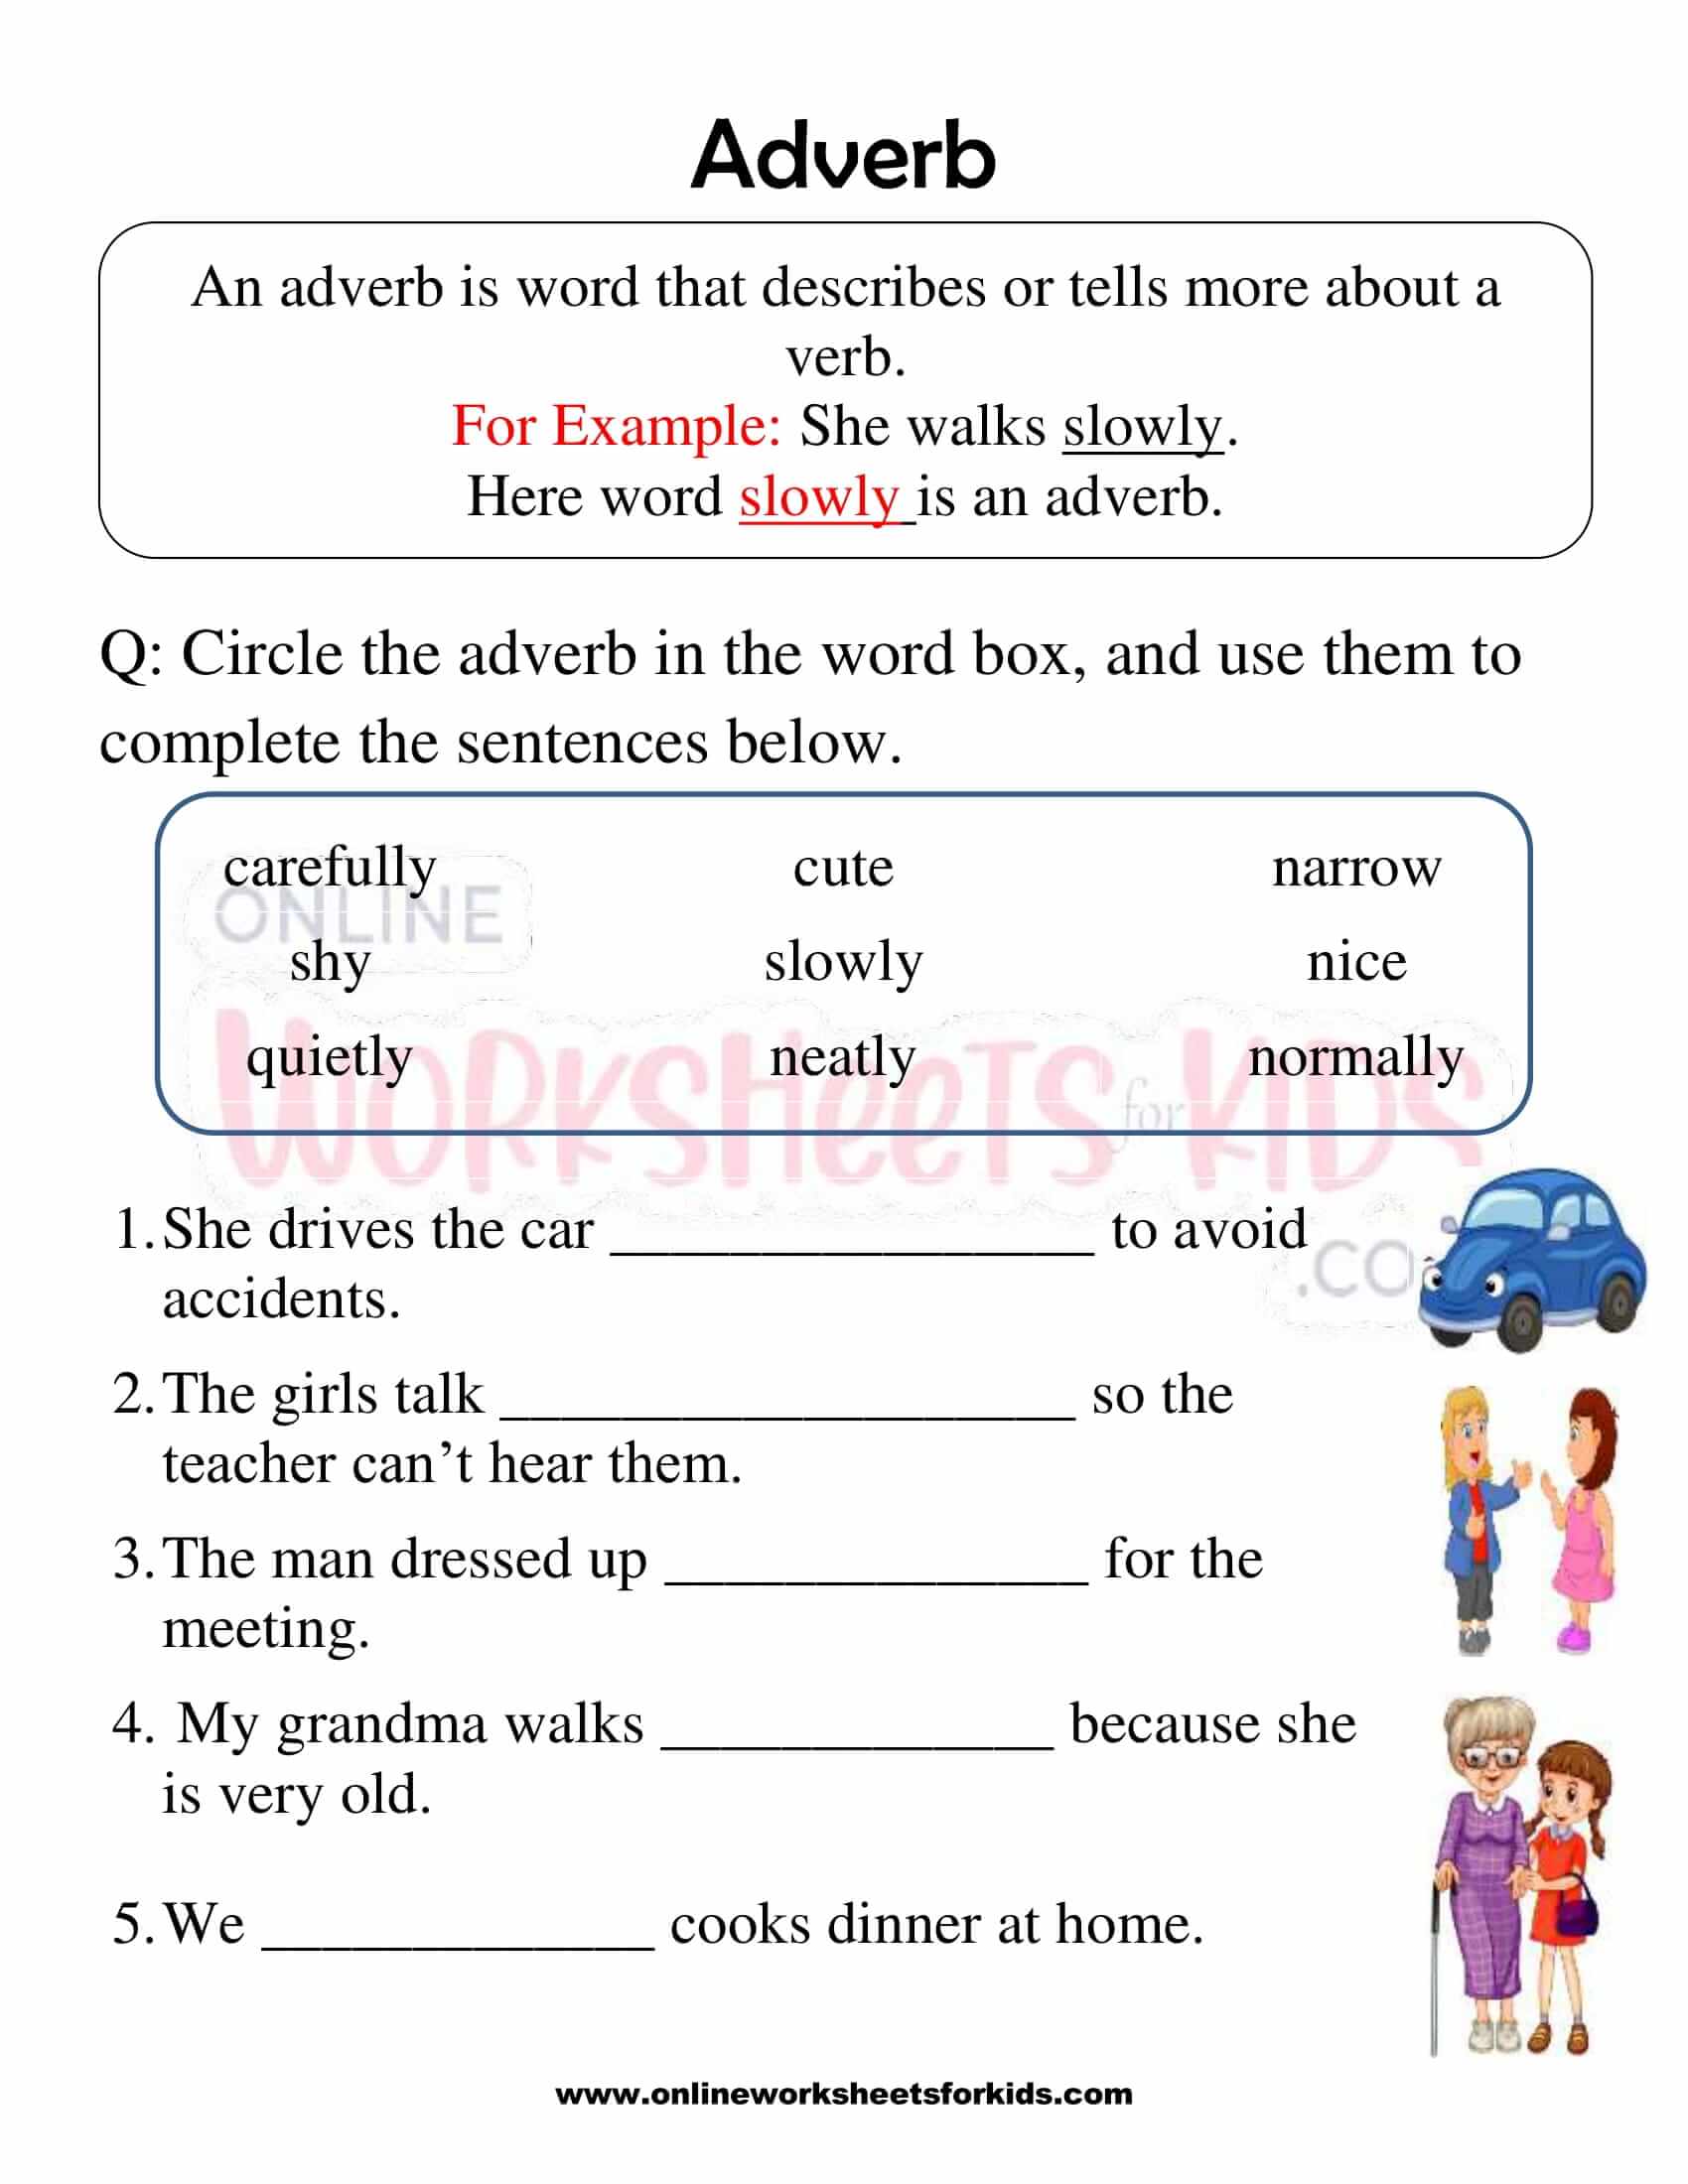 english-worksheets-for-class-1-adverbs-articles-modals-learnbuddy-in-free-printable-adverb